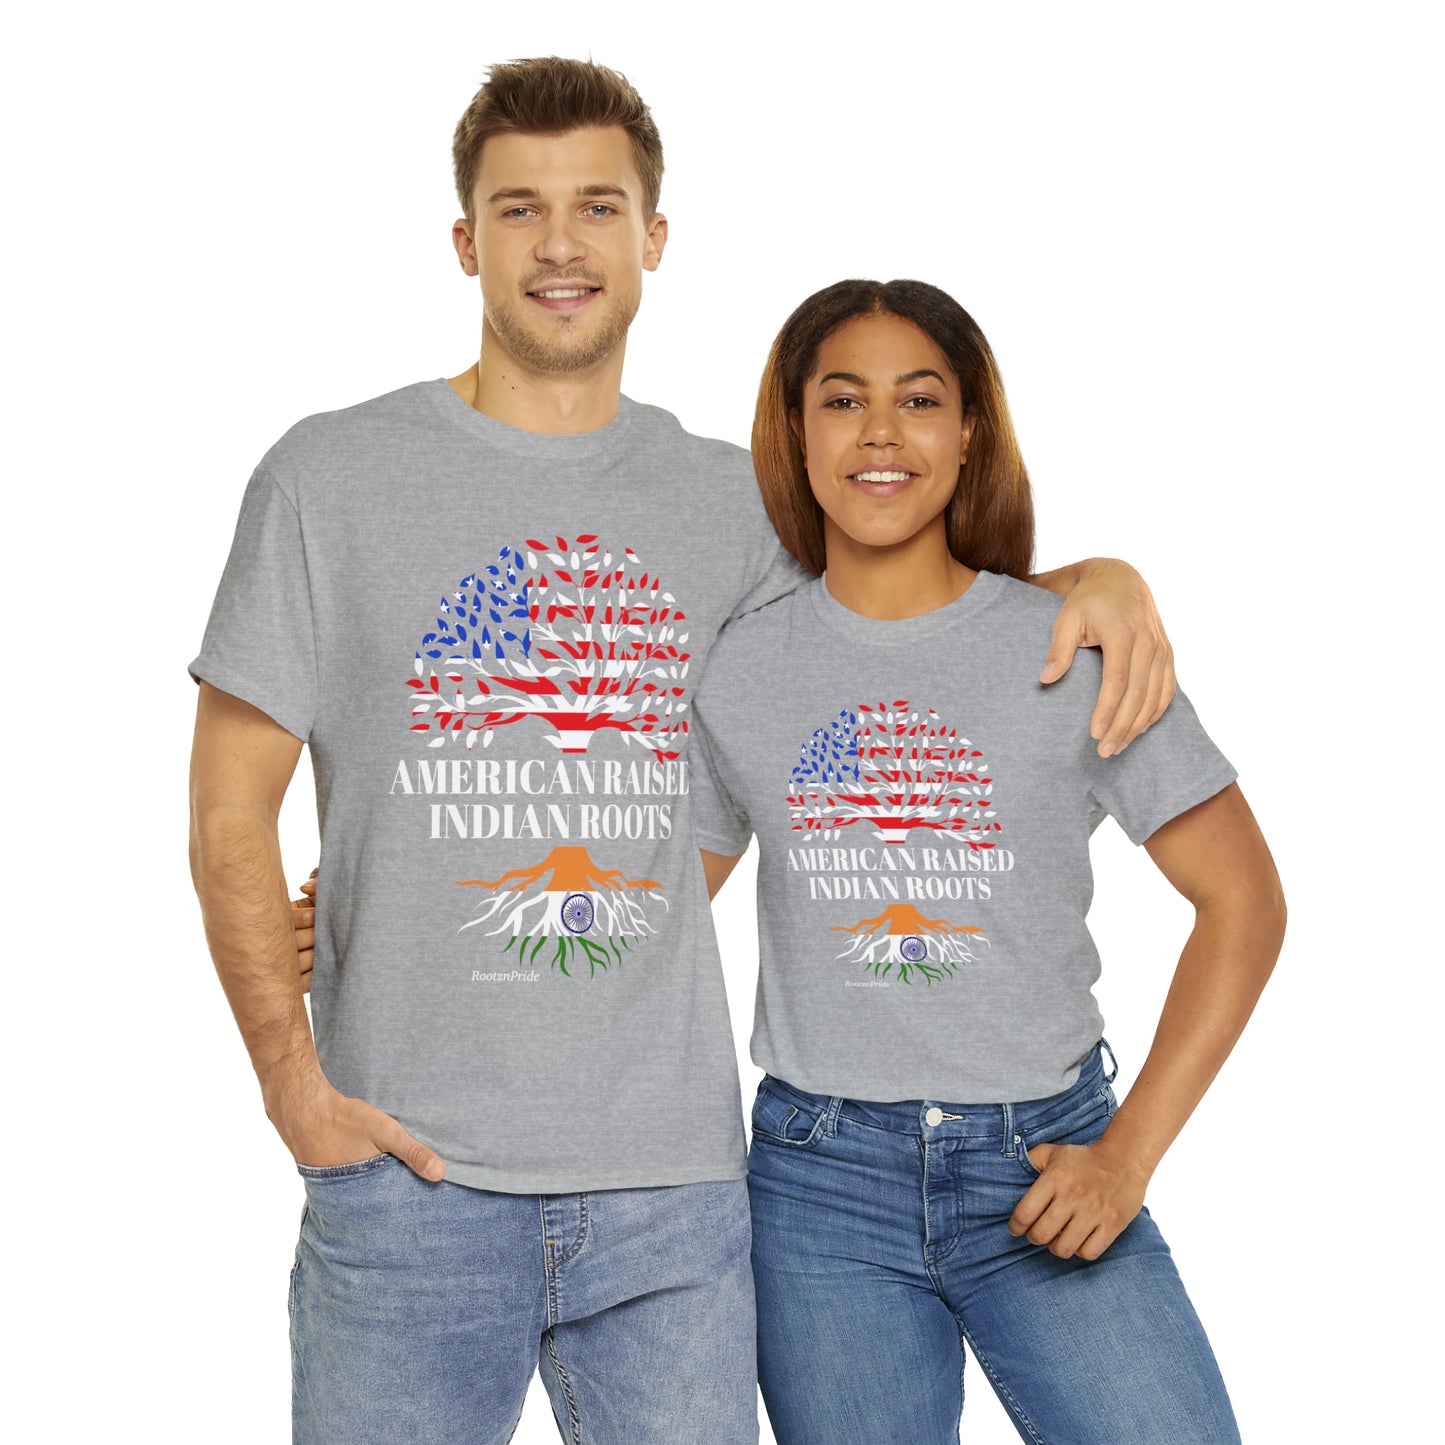 Indian Roots Design 2: Adult T-Shirt